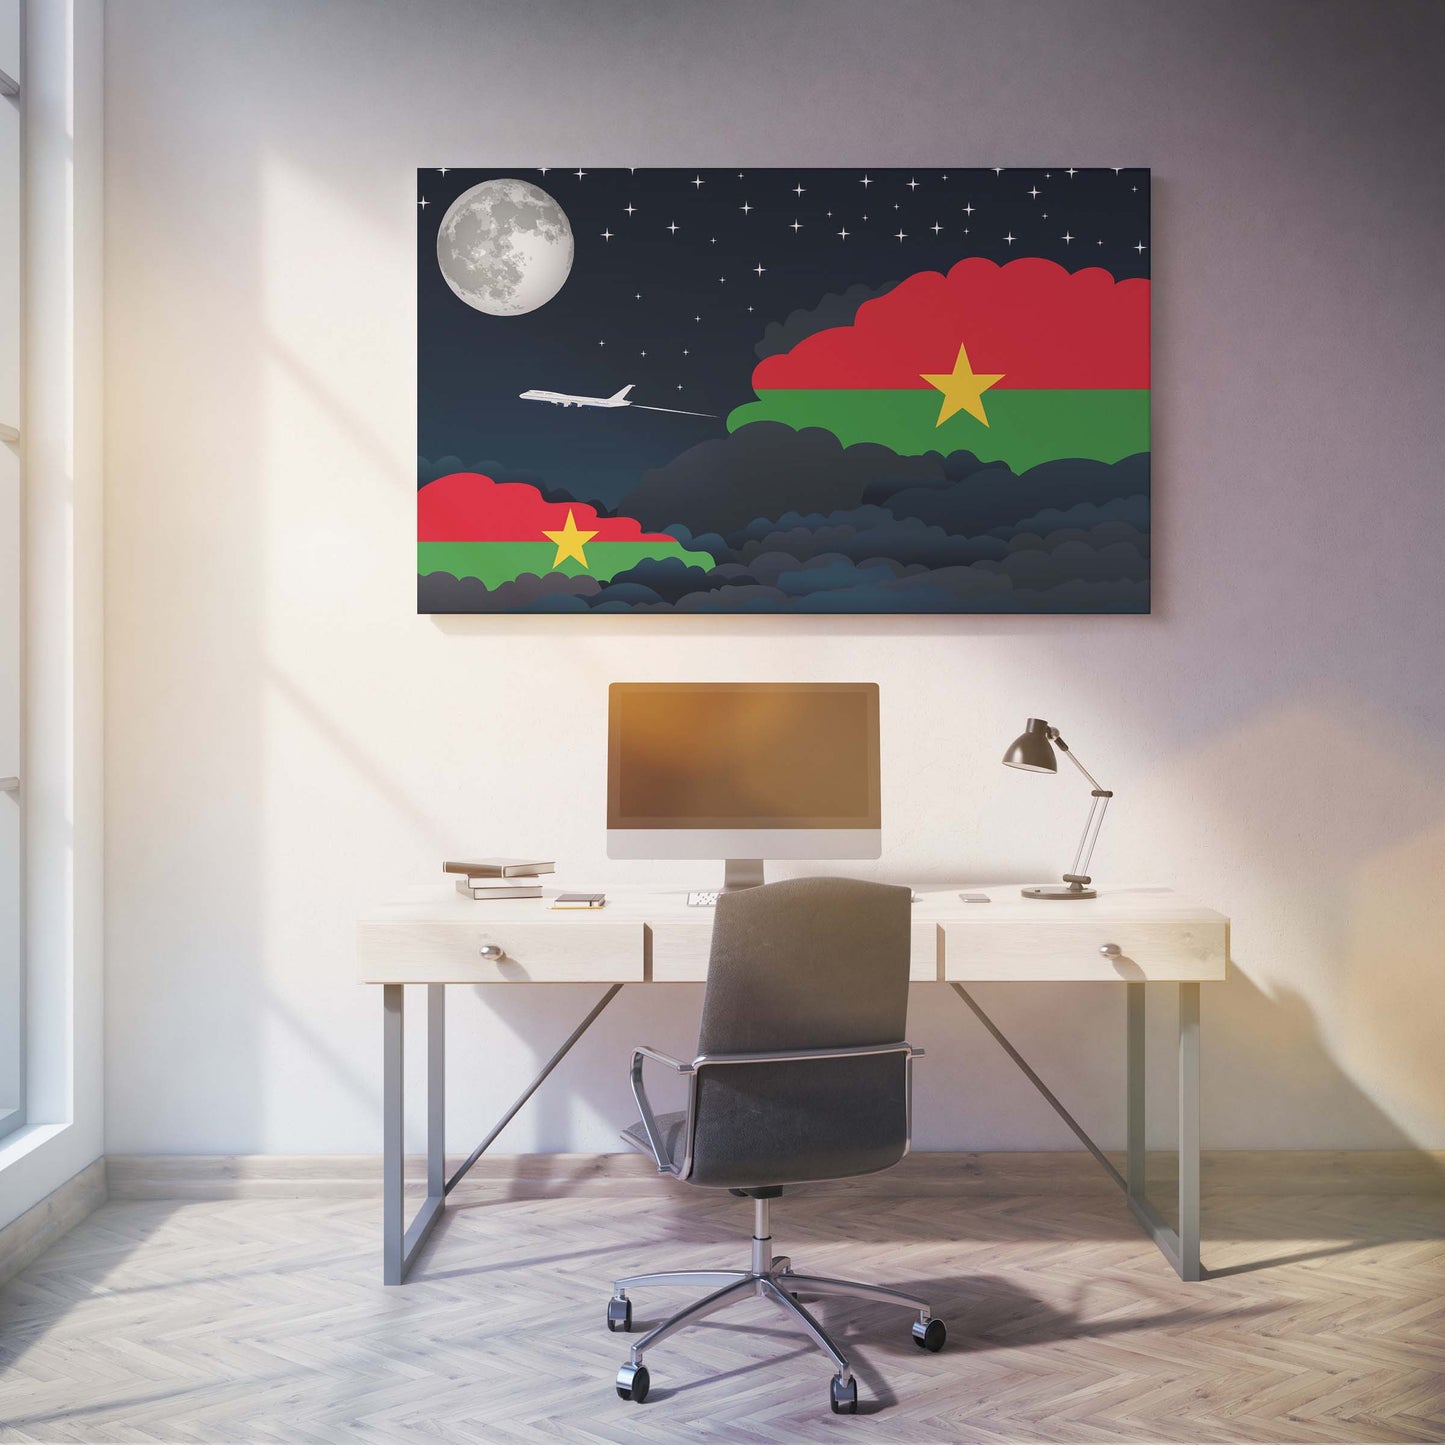 Burkina Faso Flags Night Clouds Canvas Print Framed